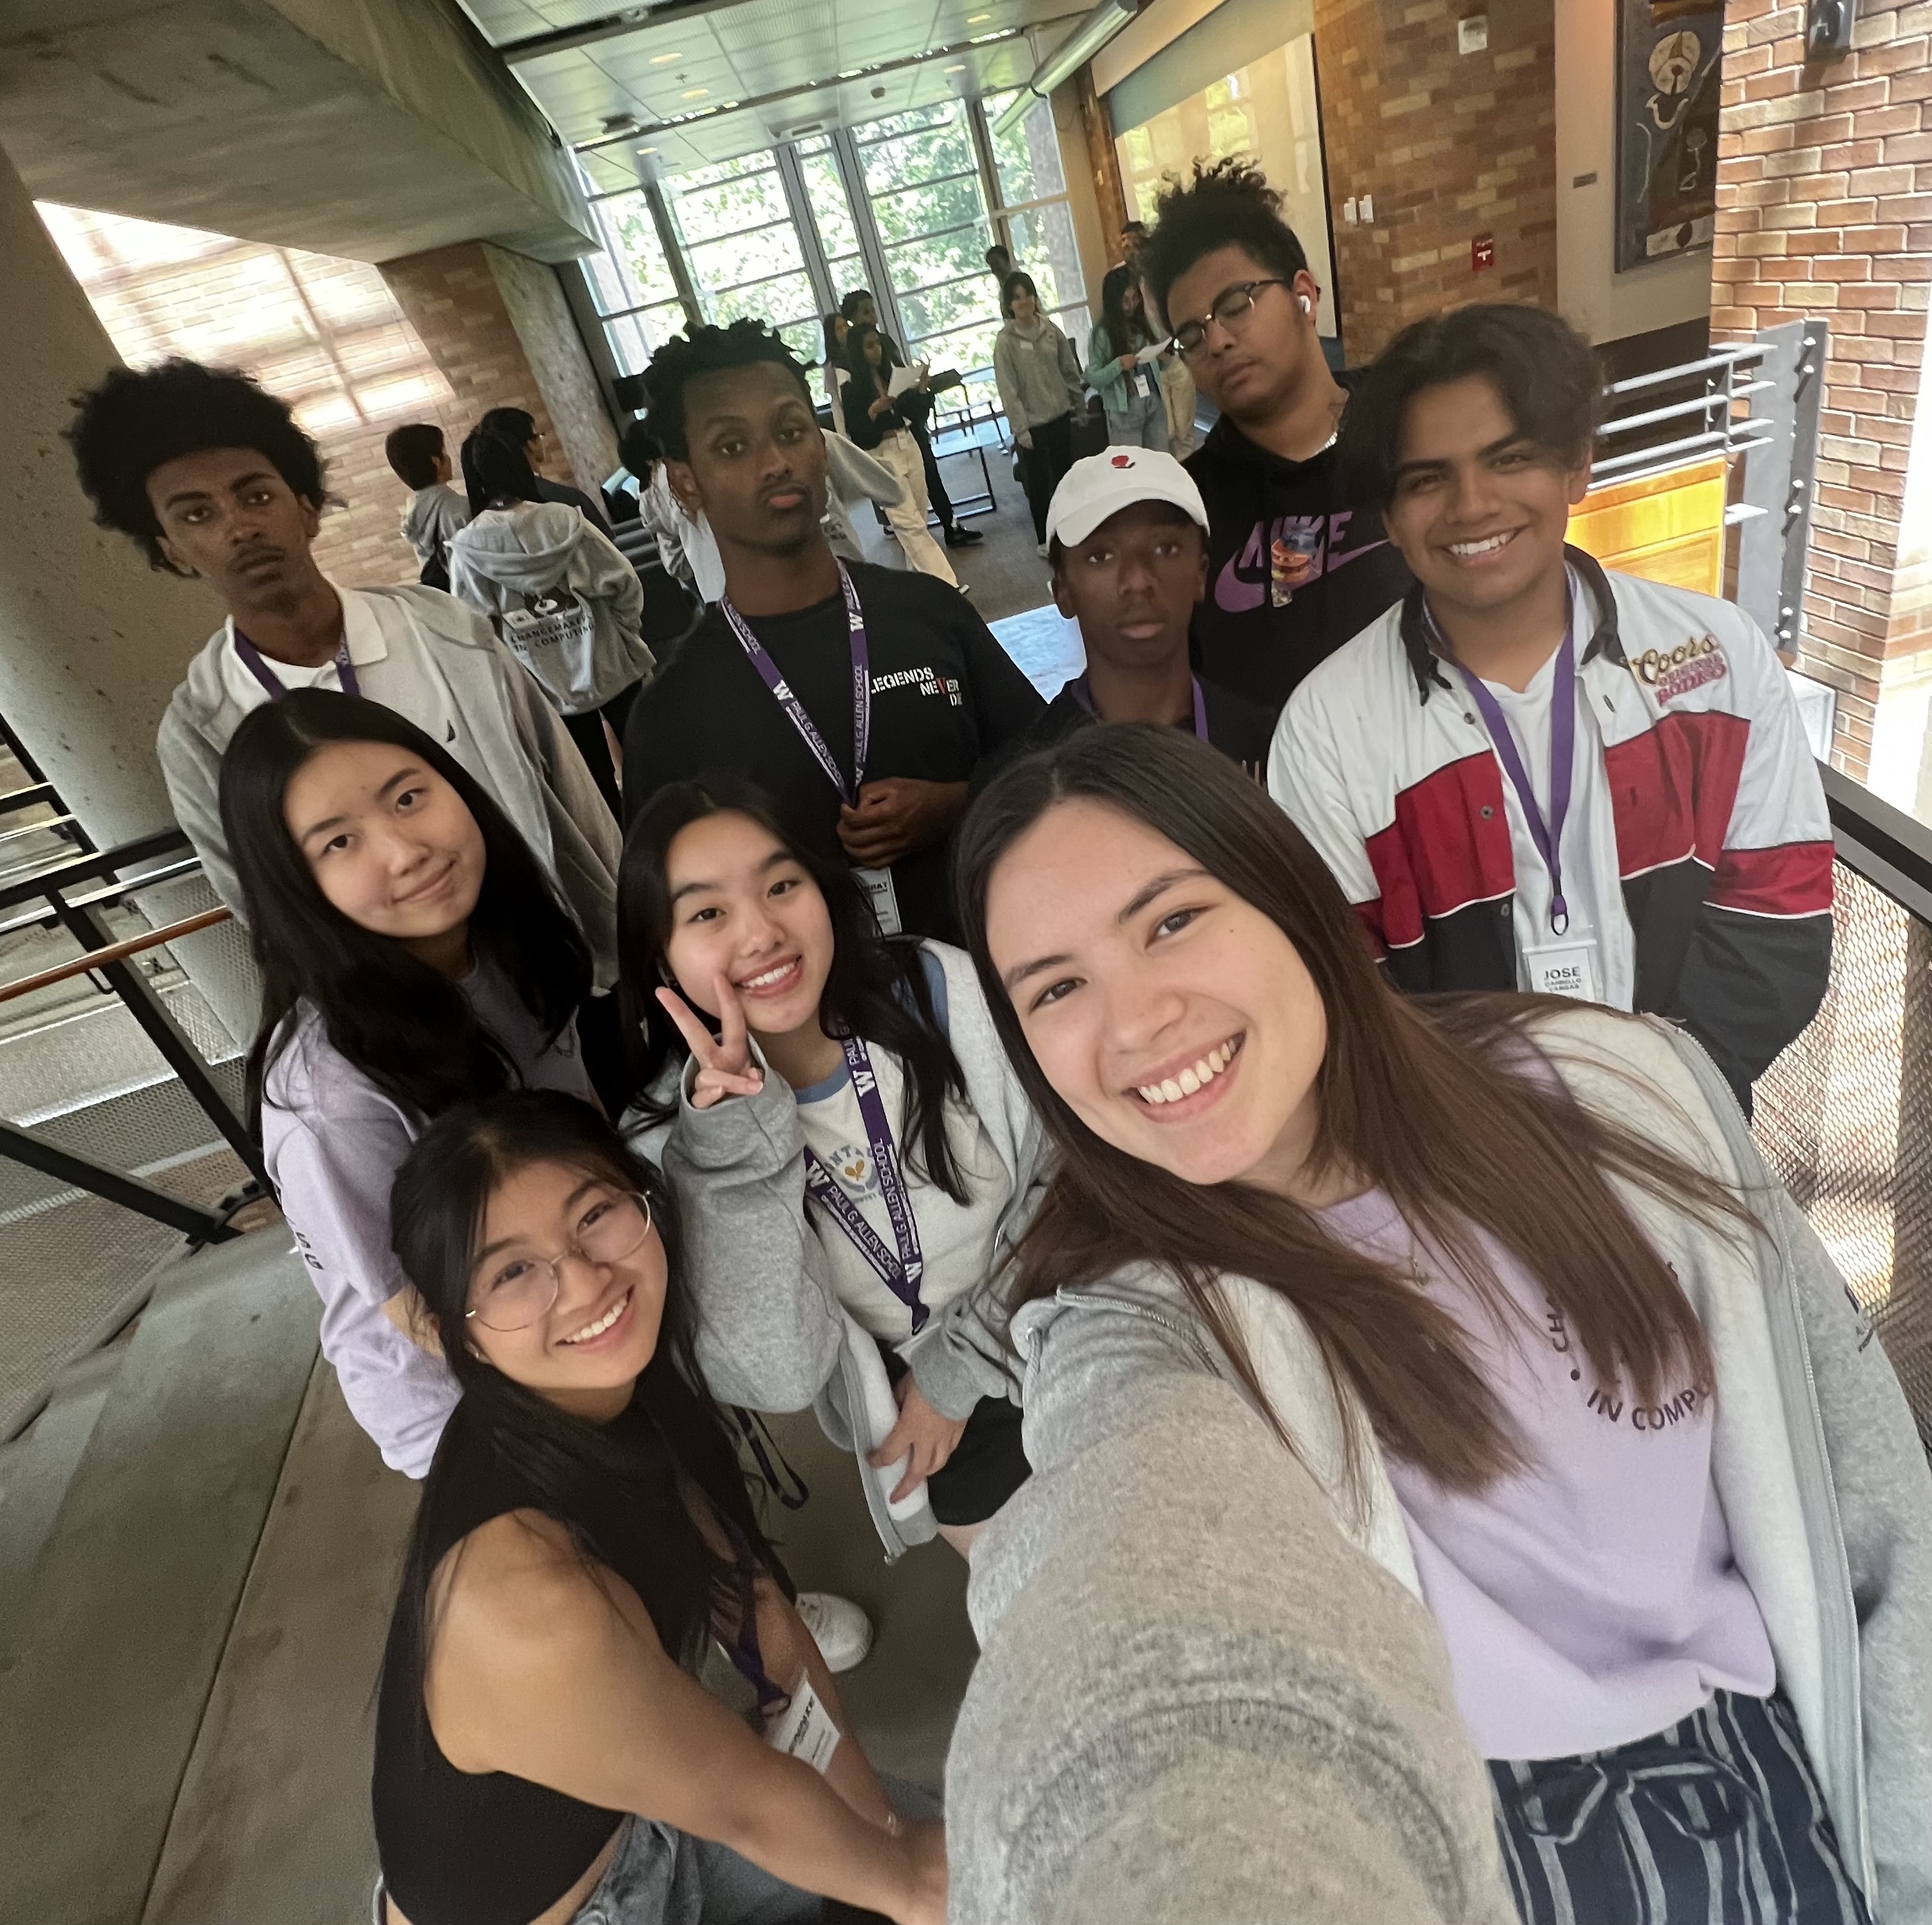 A group of 9 students smiling at a camera for a selfie